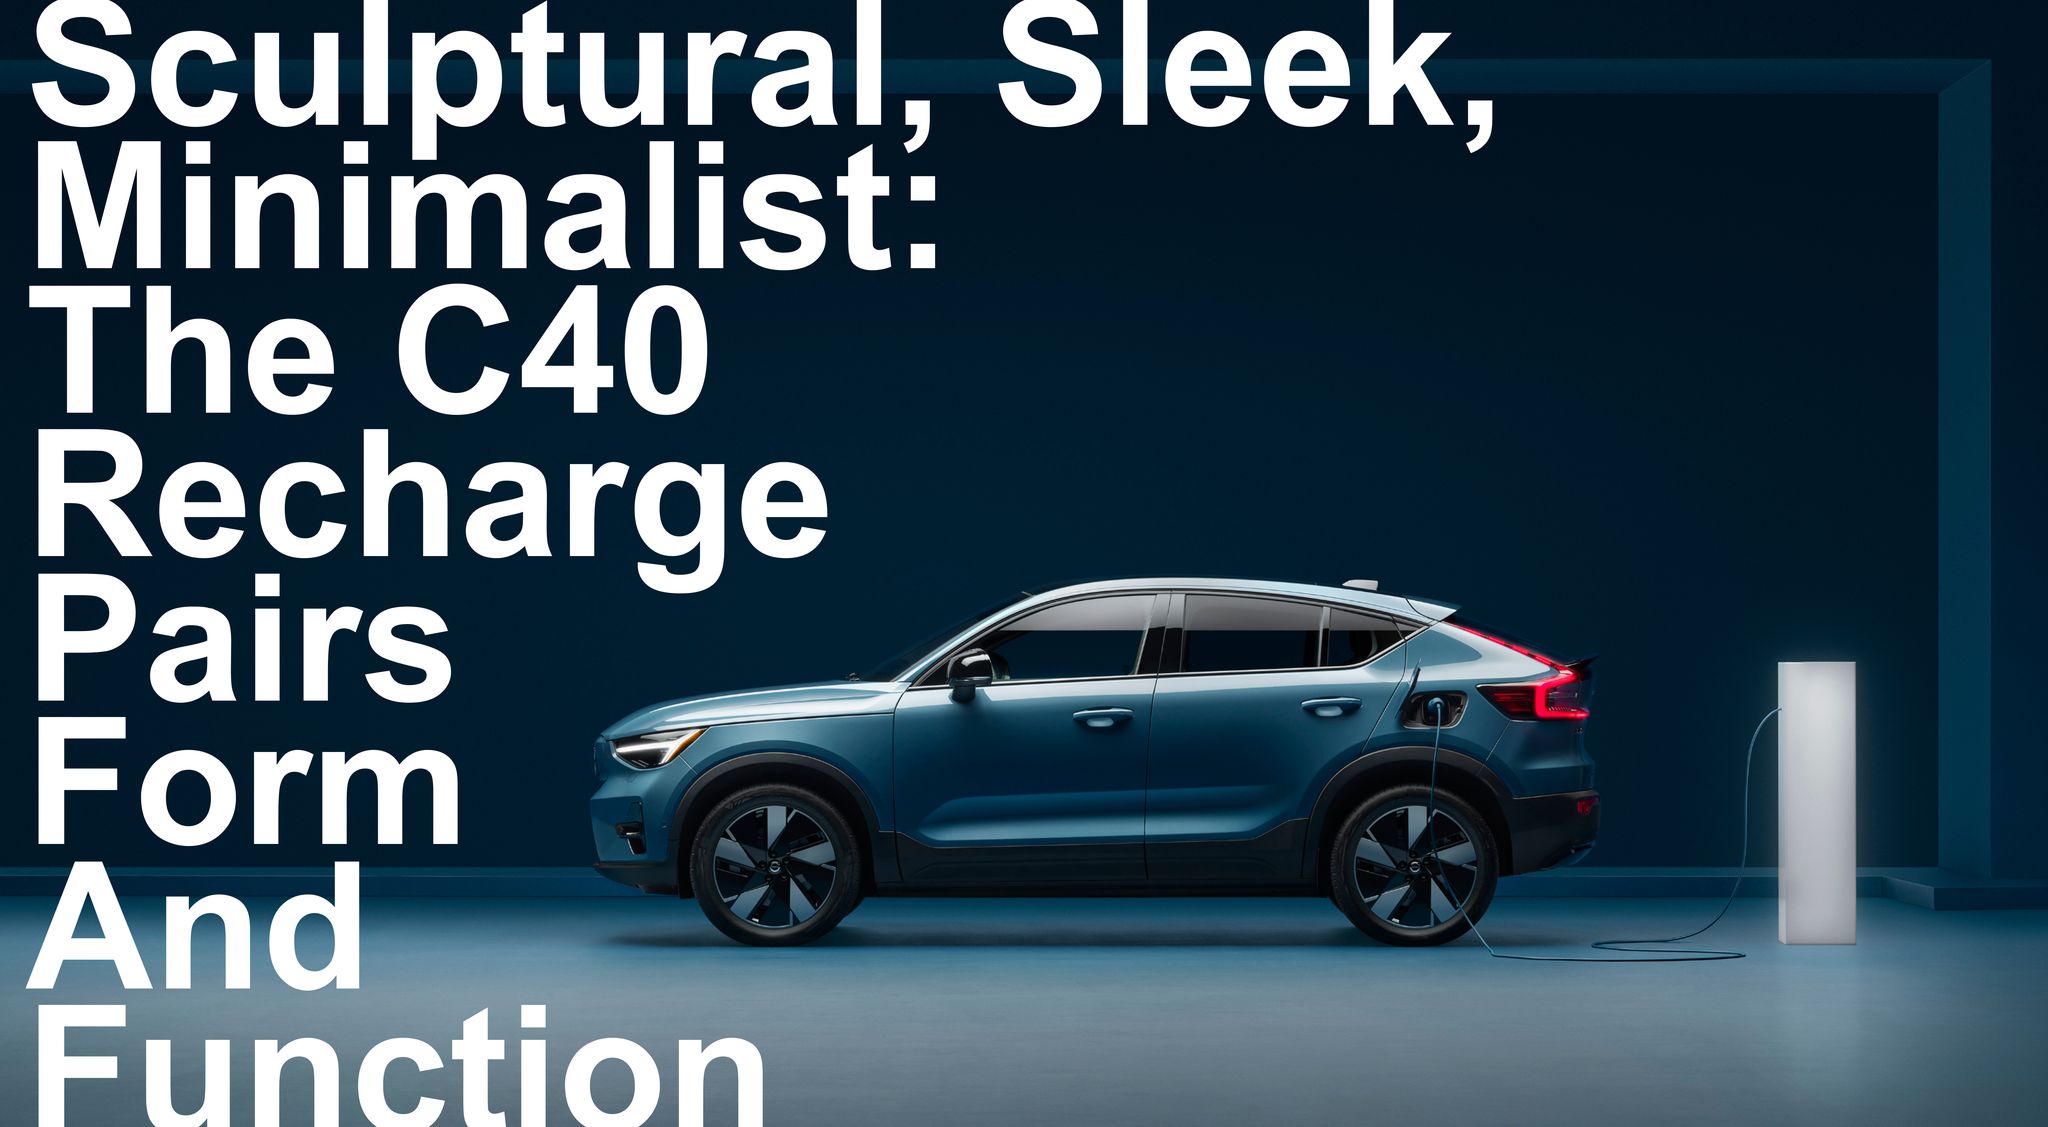 Sculpted, elegant, and simple, the C40 Recharge pairs form and function